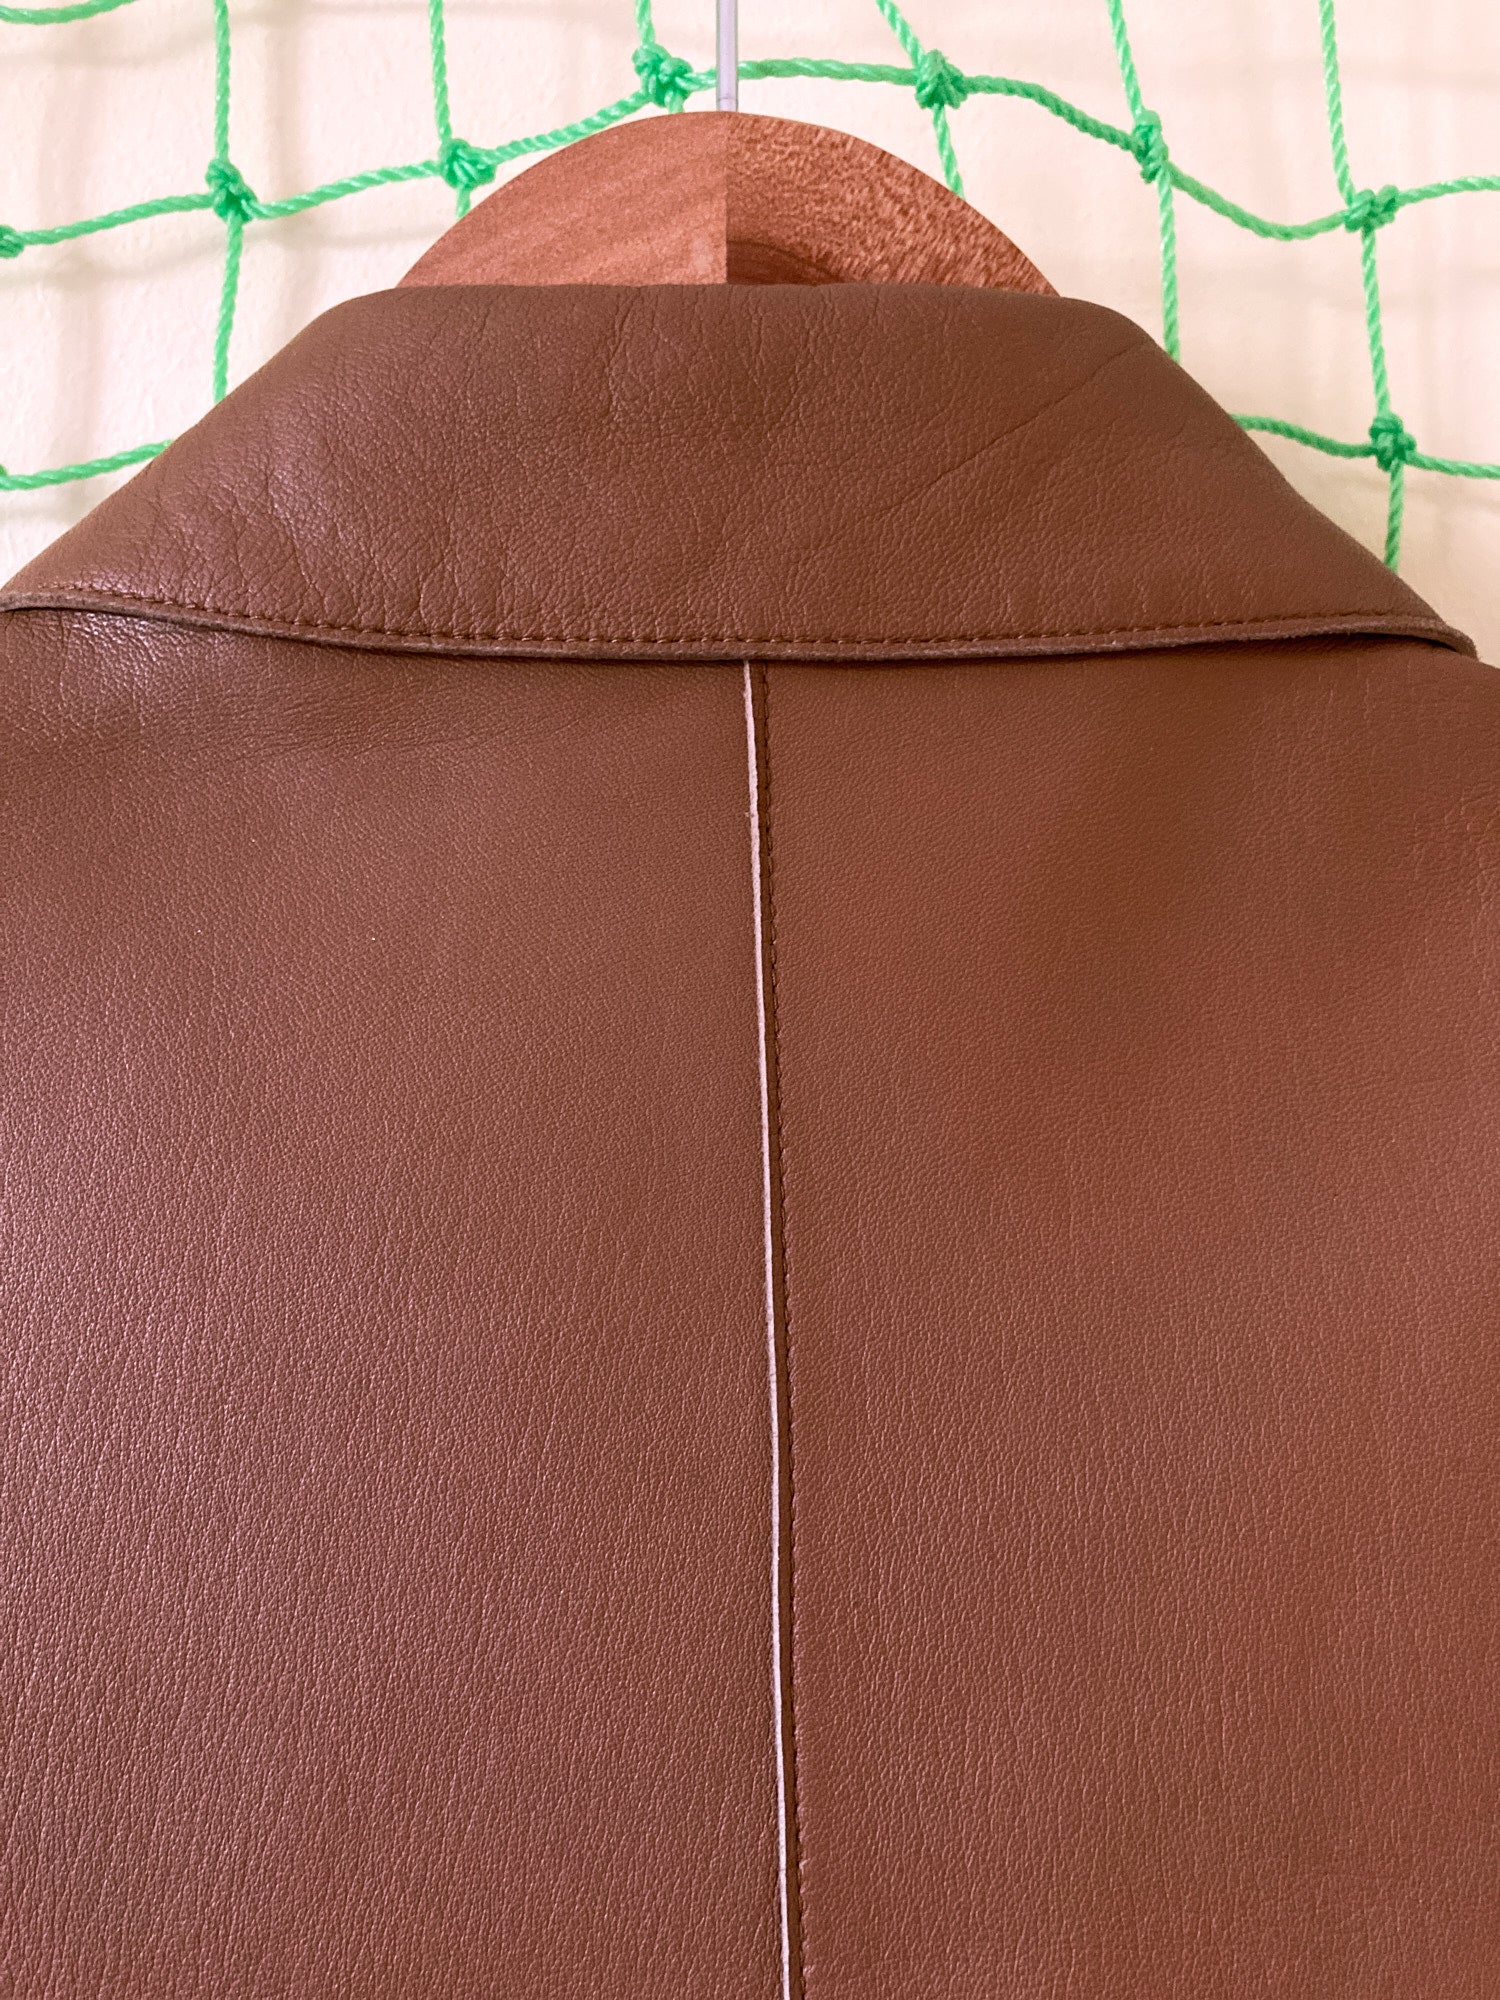 Patrick Cox Wannabe 1990s brown leather covered placket coat